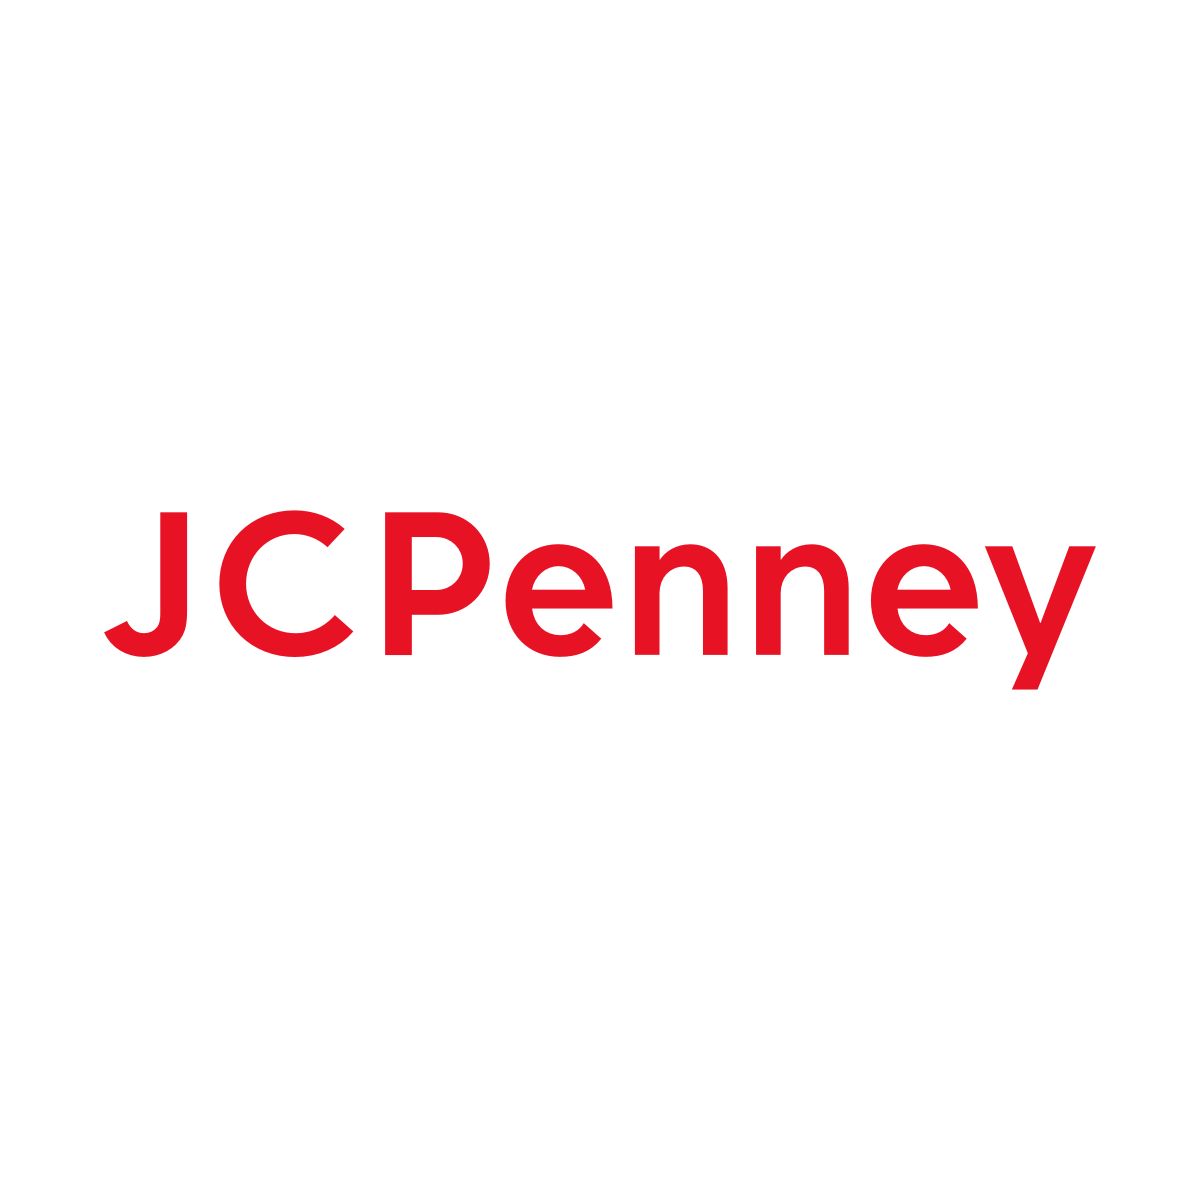 Hair Salon in Buford, GA | Haircuts & Color | JCPenney